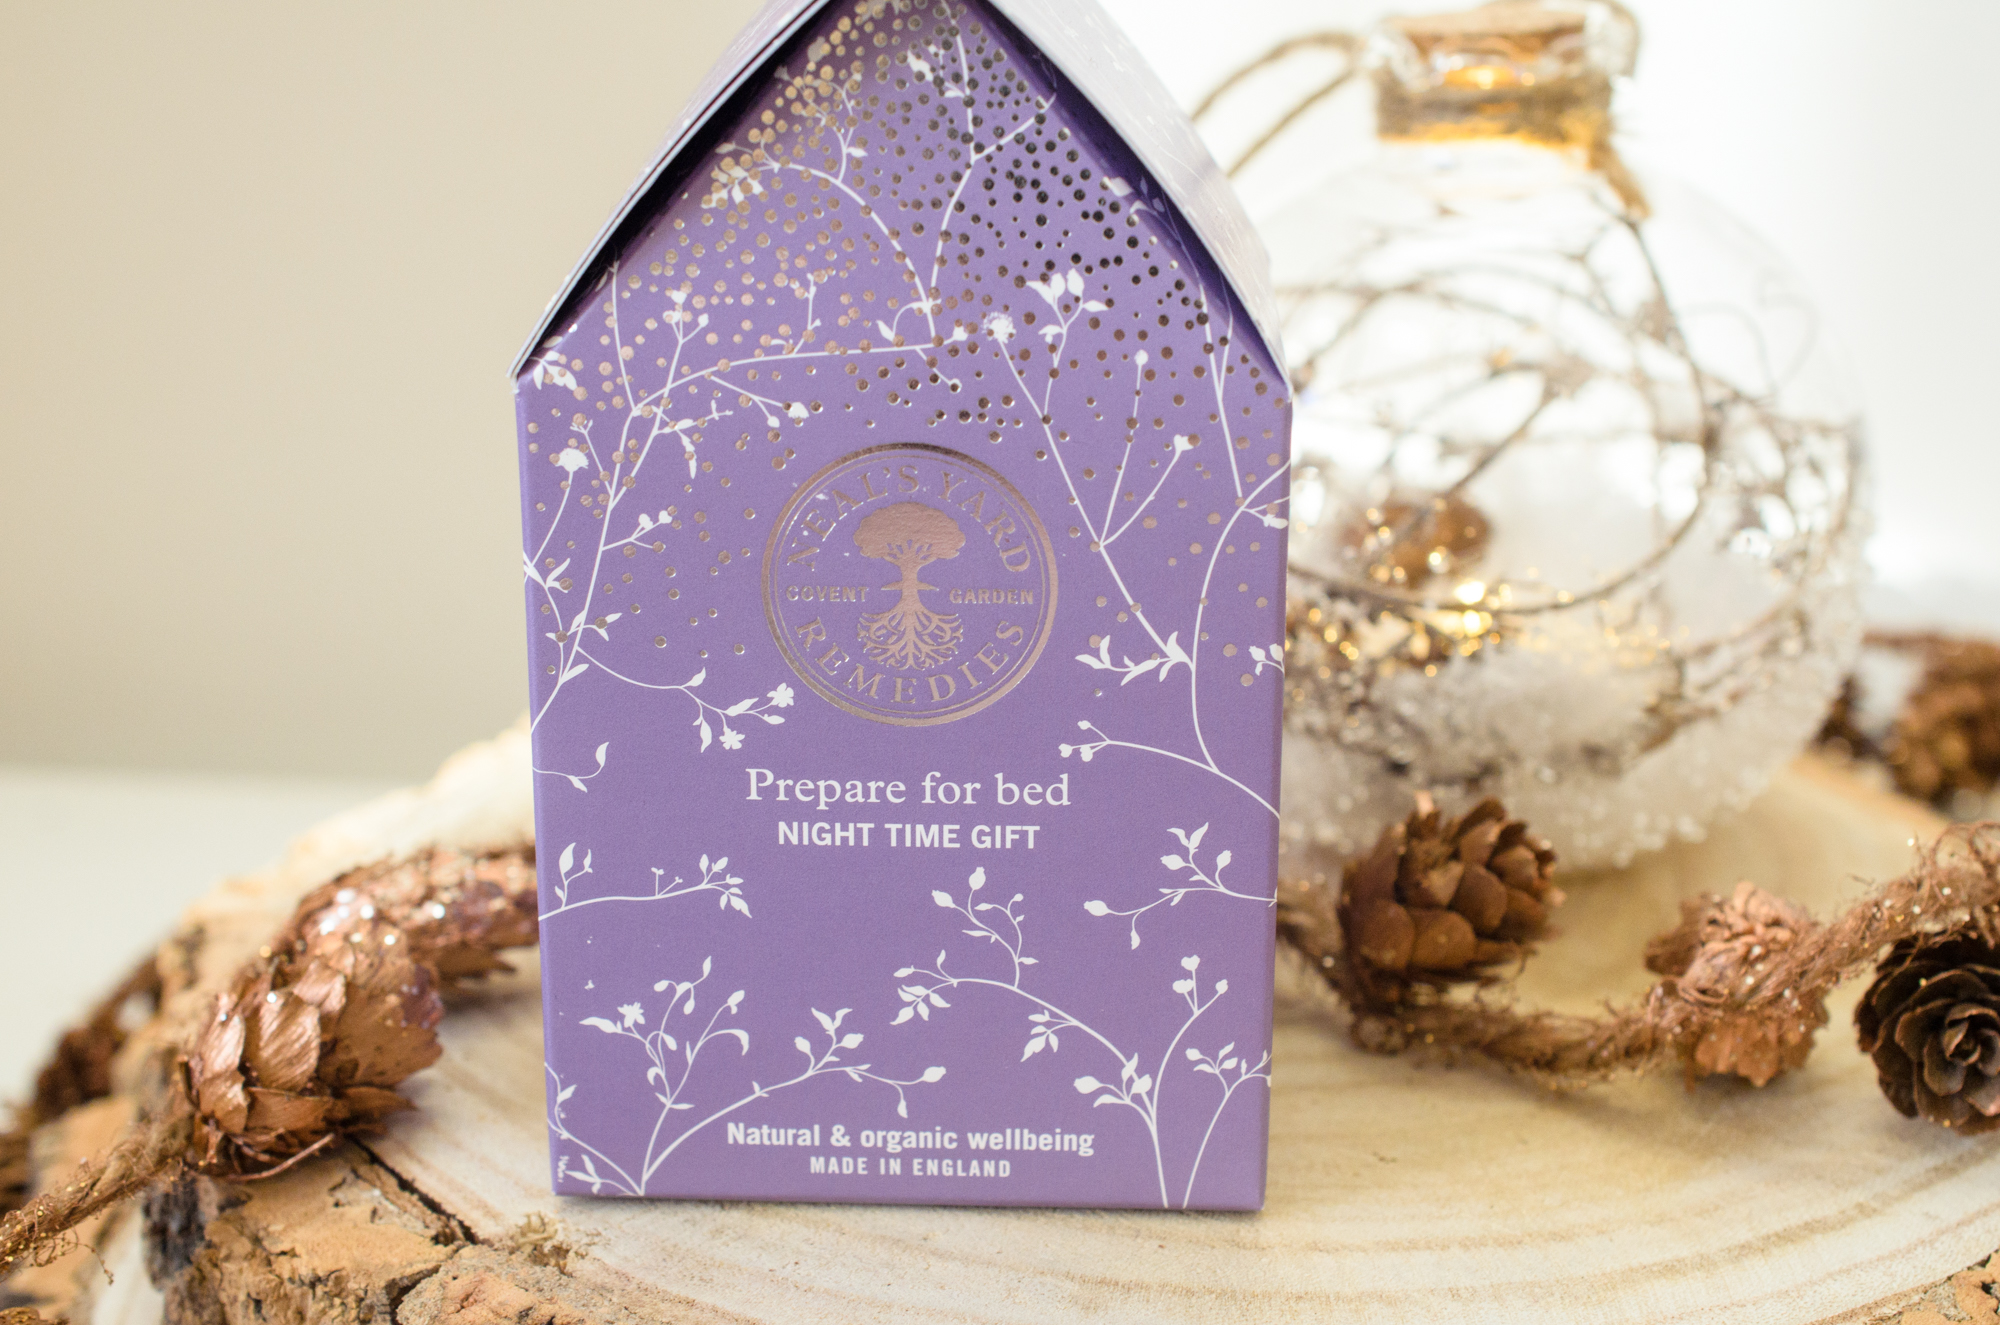 Neal's Yard Remedies Prepare For Bed Night Time Gift